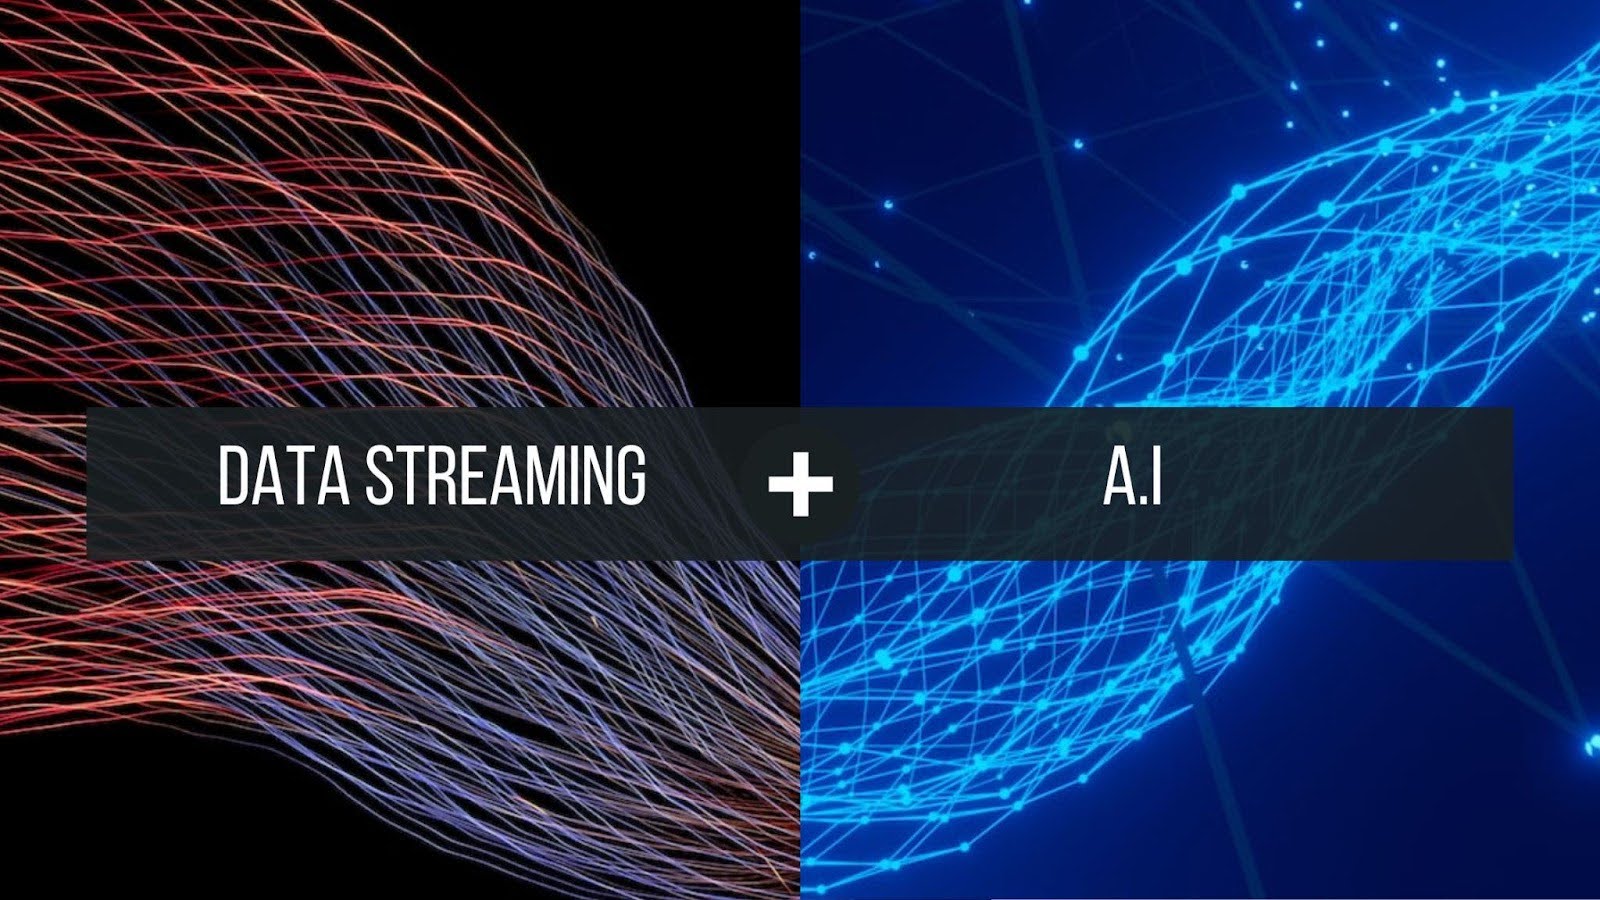 Life Happens in Real Time, Not in Batches: AI Is Better With Data Streaming